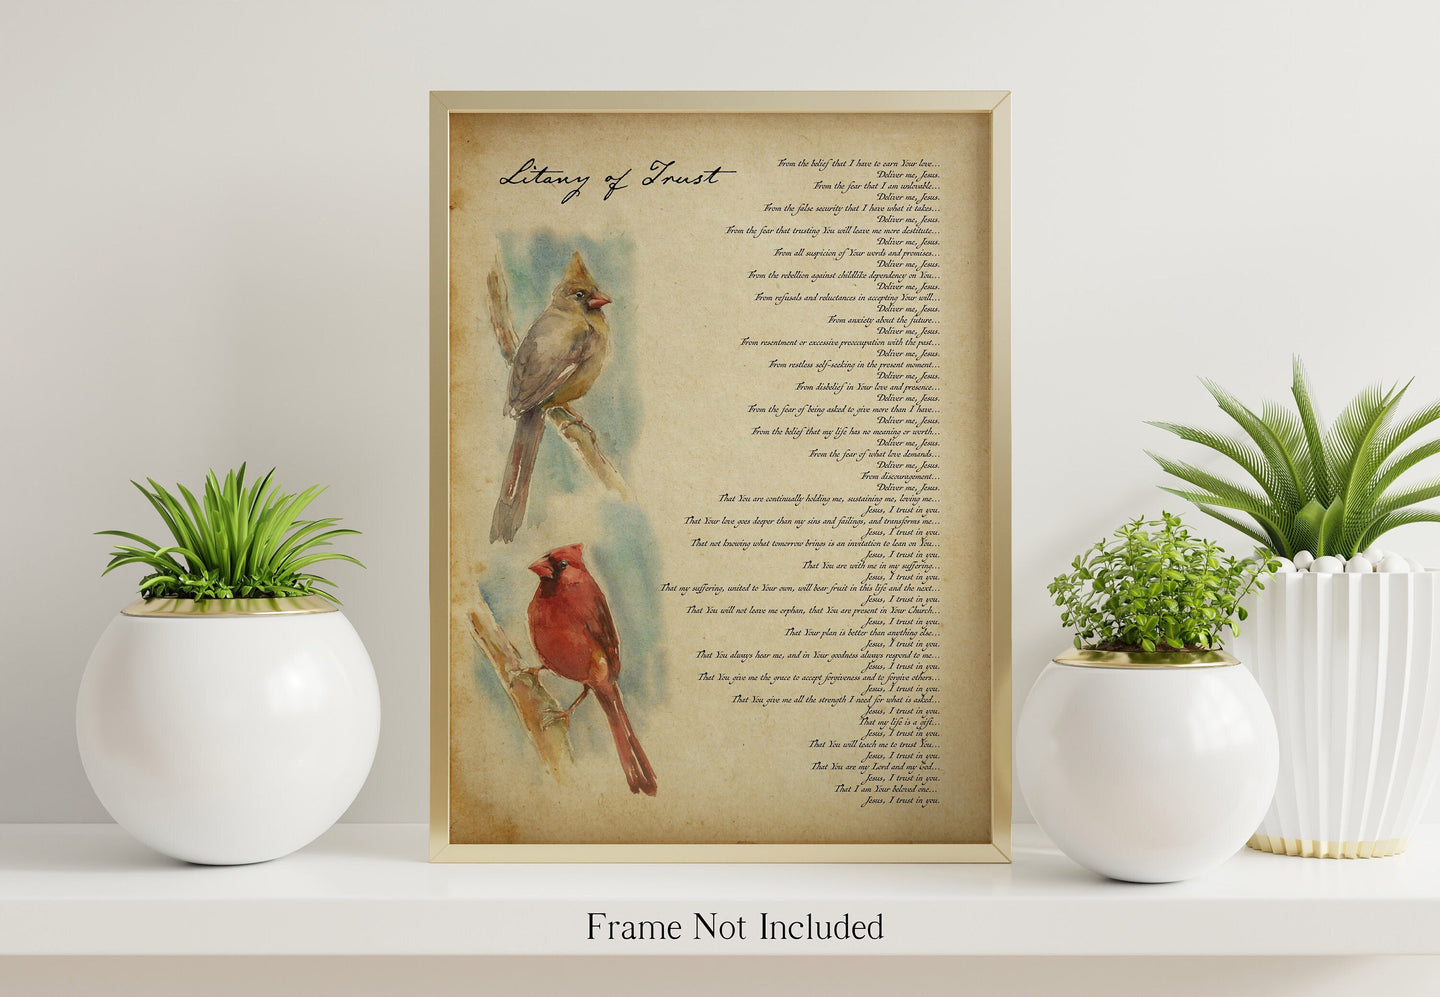 Litany of Trust Poster Print - Pair Of Cardinals Illustrated Prayer - Catholic Prayer for Trust - Catholic Wall Art - Print Without Frame